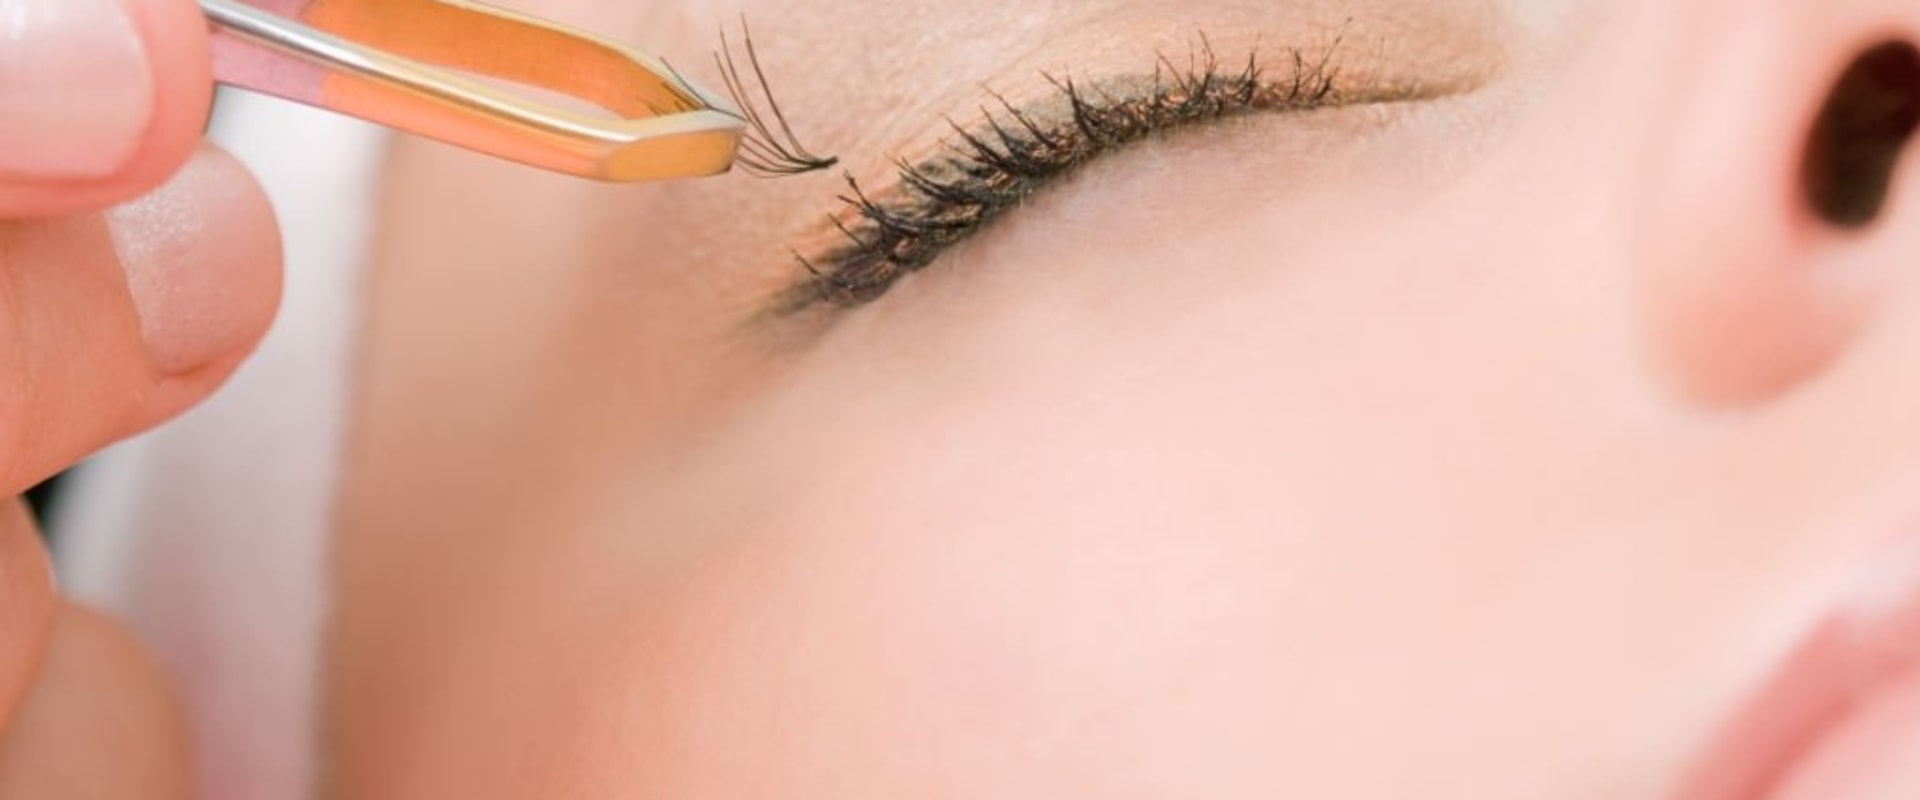 Is it safe to constantly get eyelash extensions?